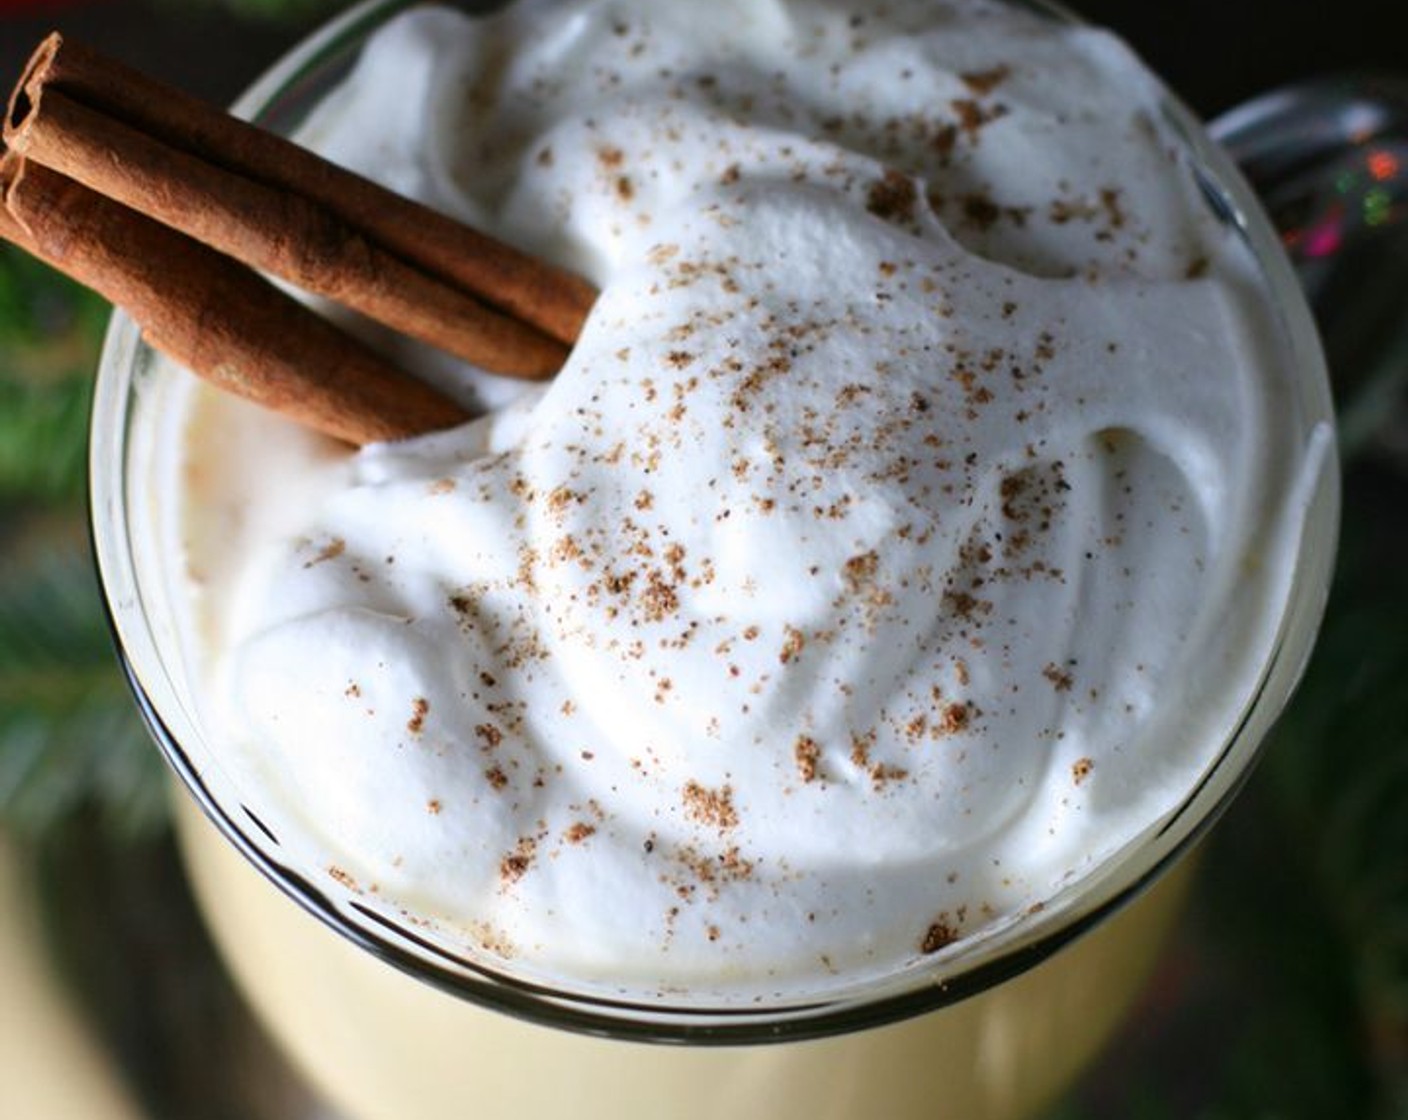 step 4 Whip Heavy Cream (1 cup) with Swerve Confectioners Sugar Replacement (1 Tbsp). Garnish eggnog with sweetened whipped cream, nutmeg, and Cinnamon Sticks (to taste). Serve and enjoy!